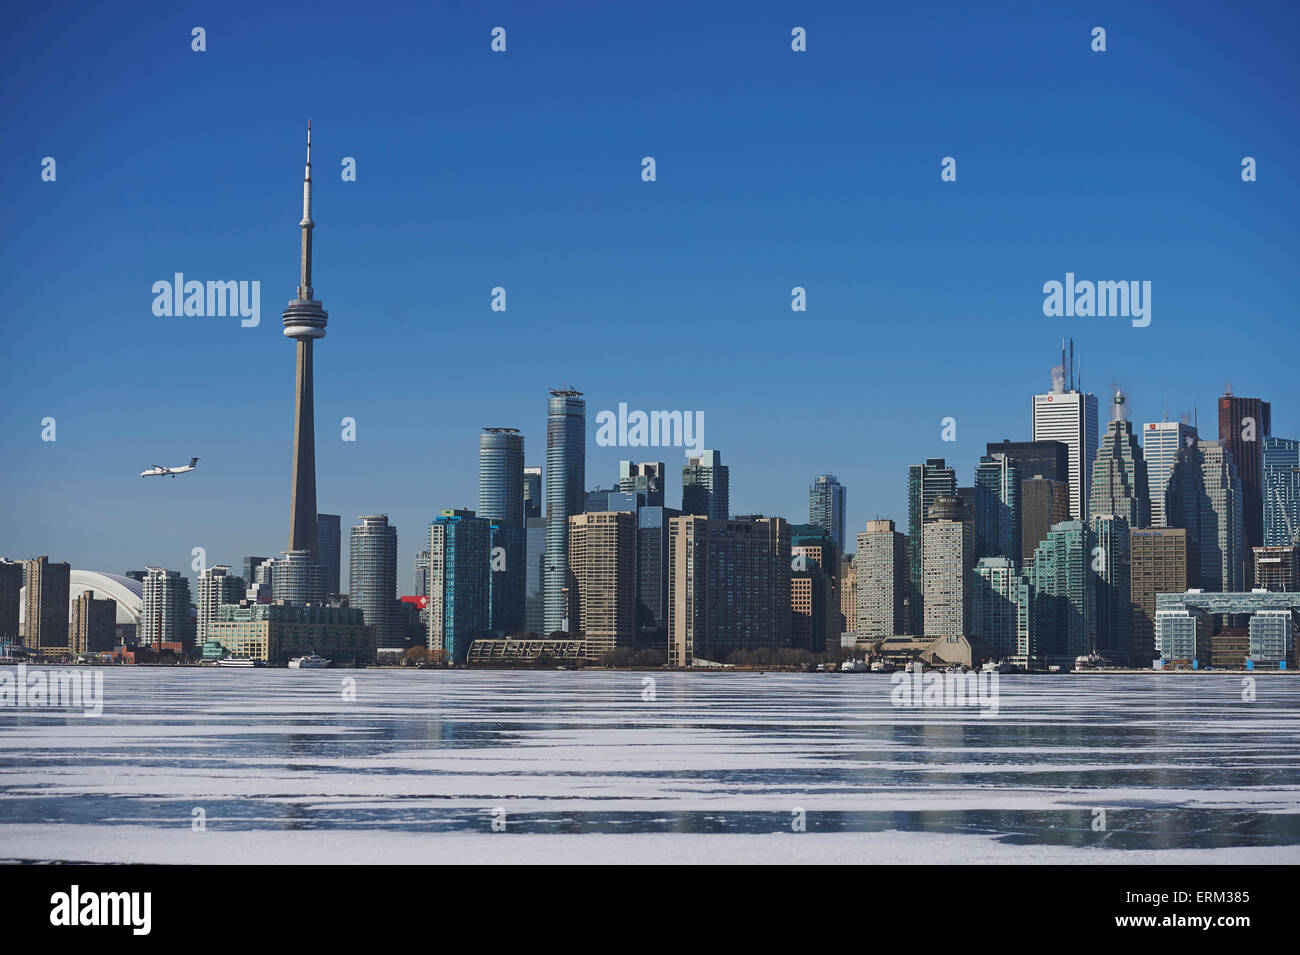 Airplane against city skyline in winter from Ward's Island; Toronto, Ontario, Canada Stock Photo